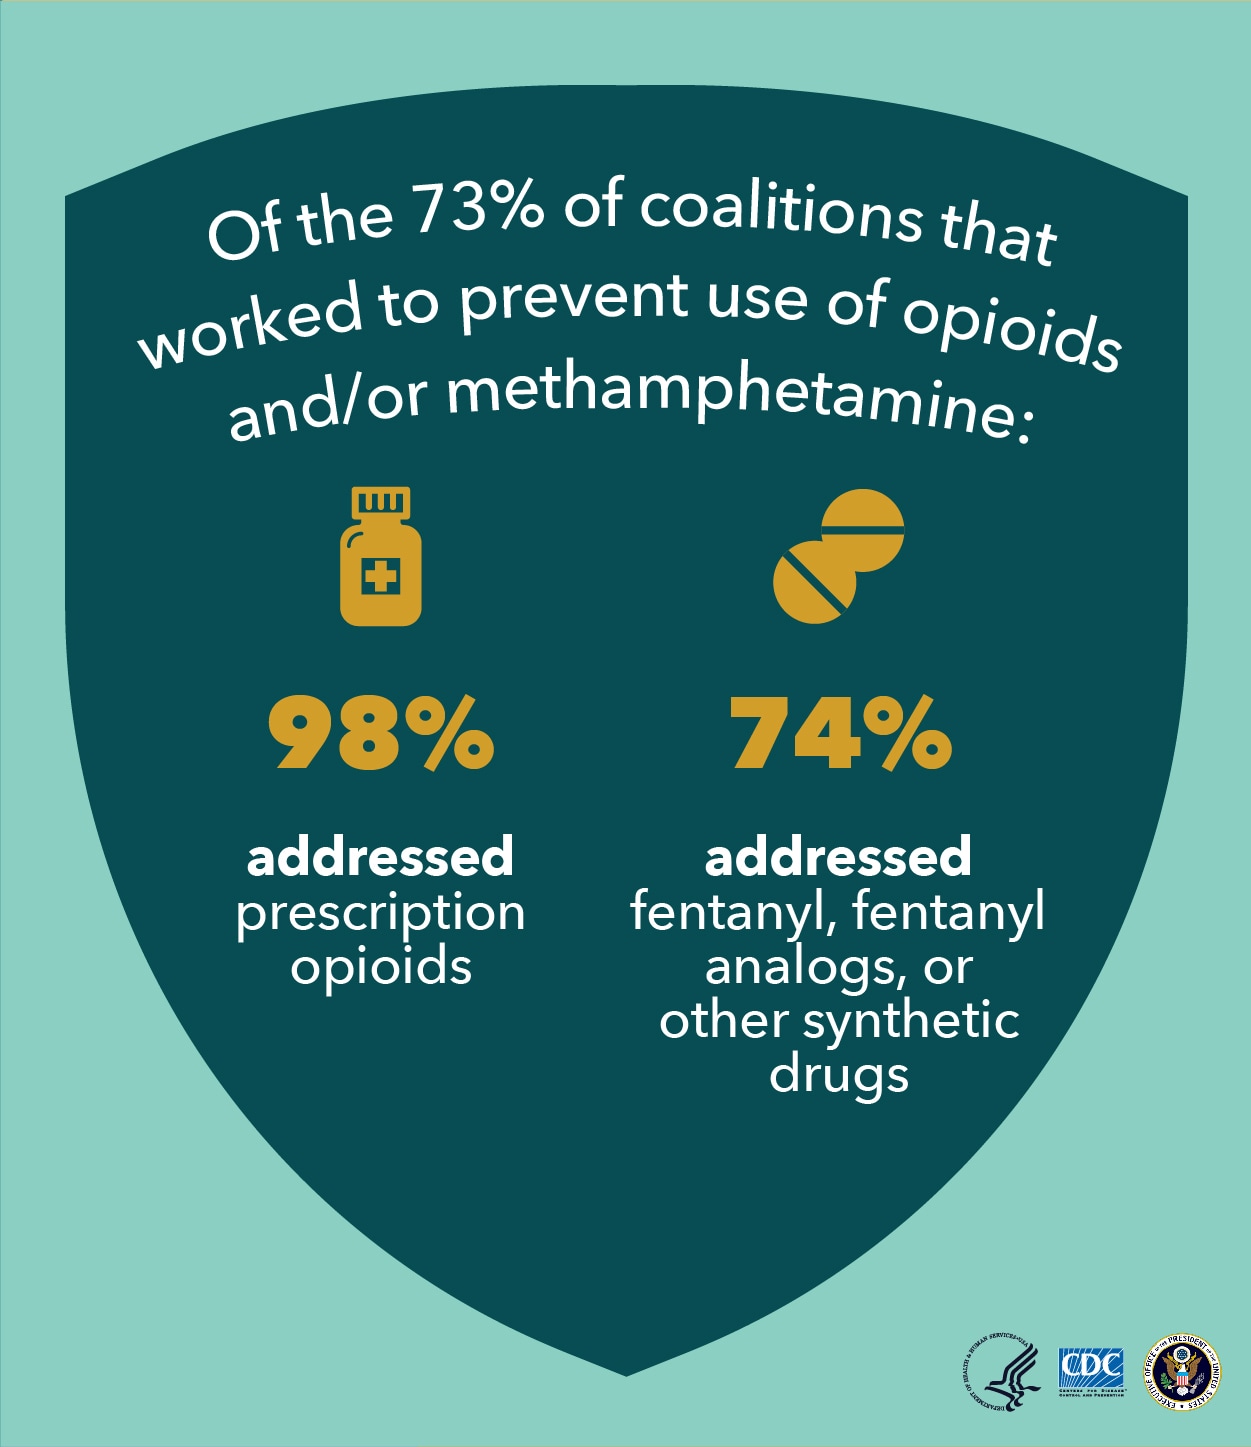 Of the 73% of coalitions that worked to prevent use of opioids and/or methamphetamine: 98% addressed prescription opioids 74% addressed fentanyl, fentanyl analogs, or other synthetic drugs